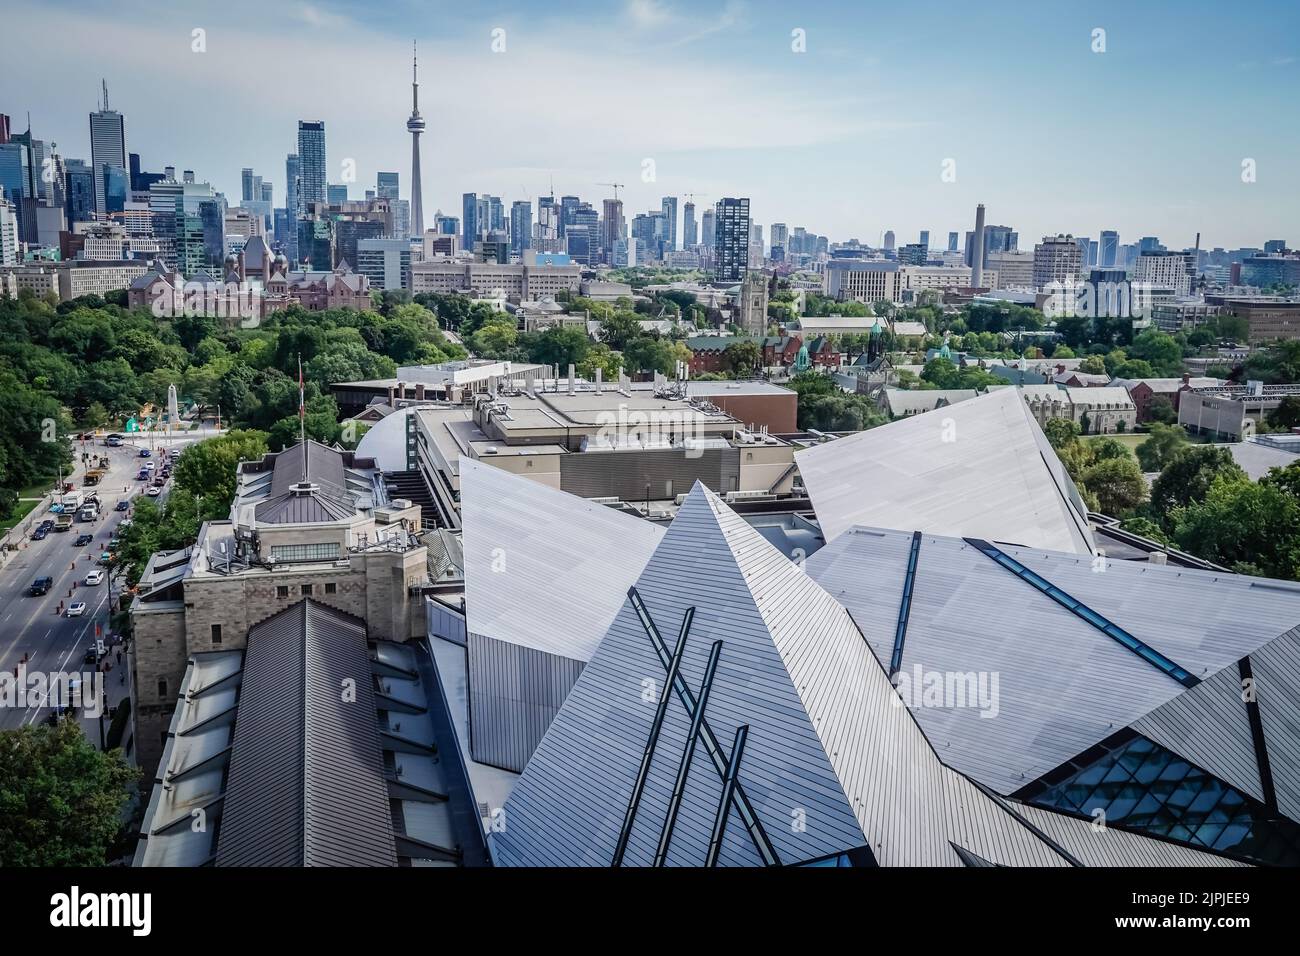 toronto downtown skyline royal ontario museum in front Stock Photo